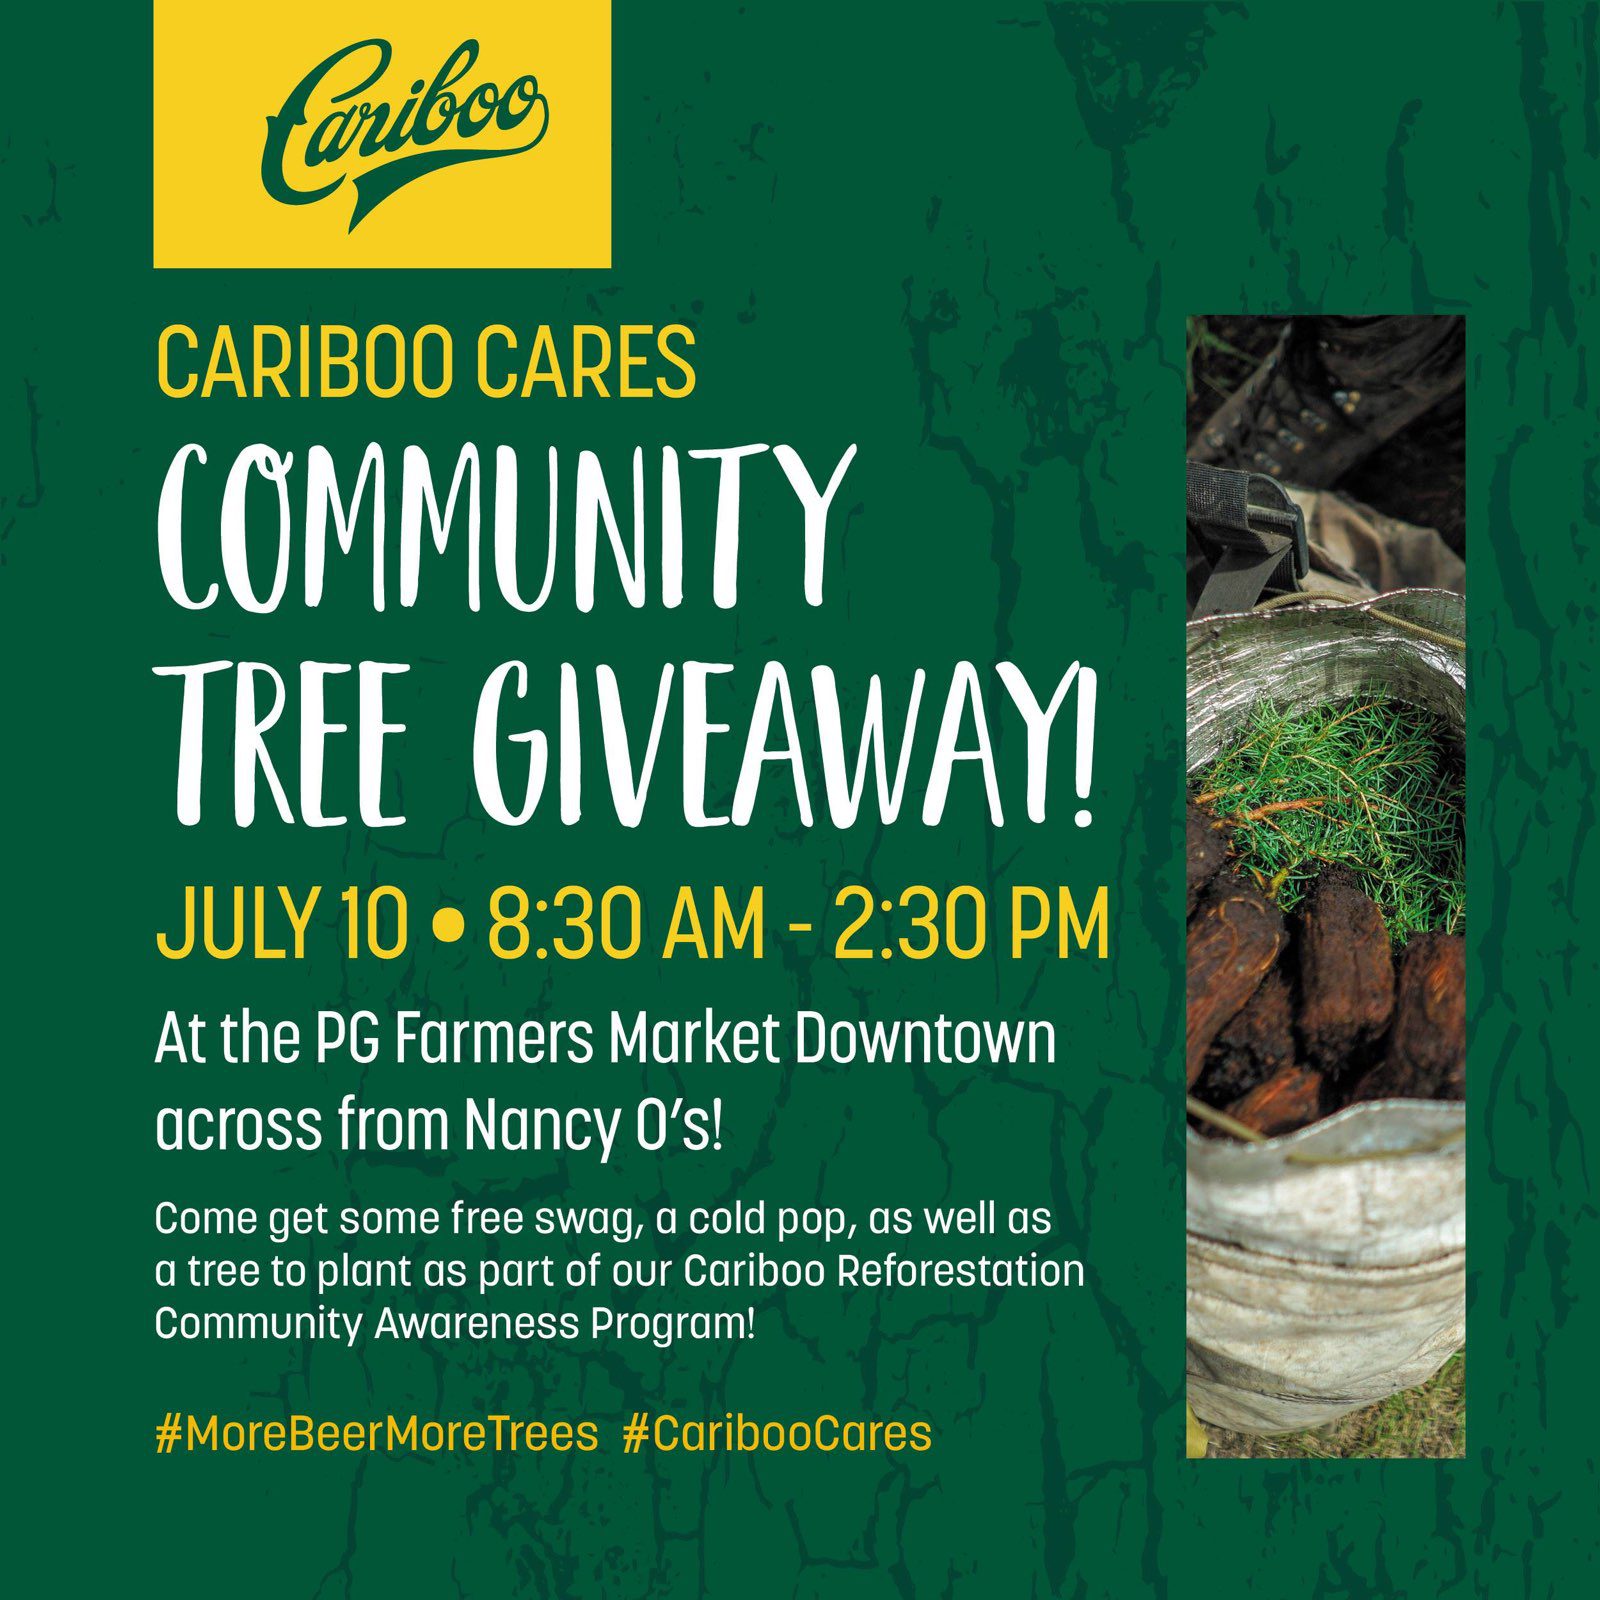 Cariboo Cares: Community Tree Giveaway